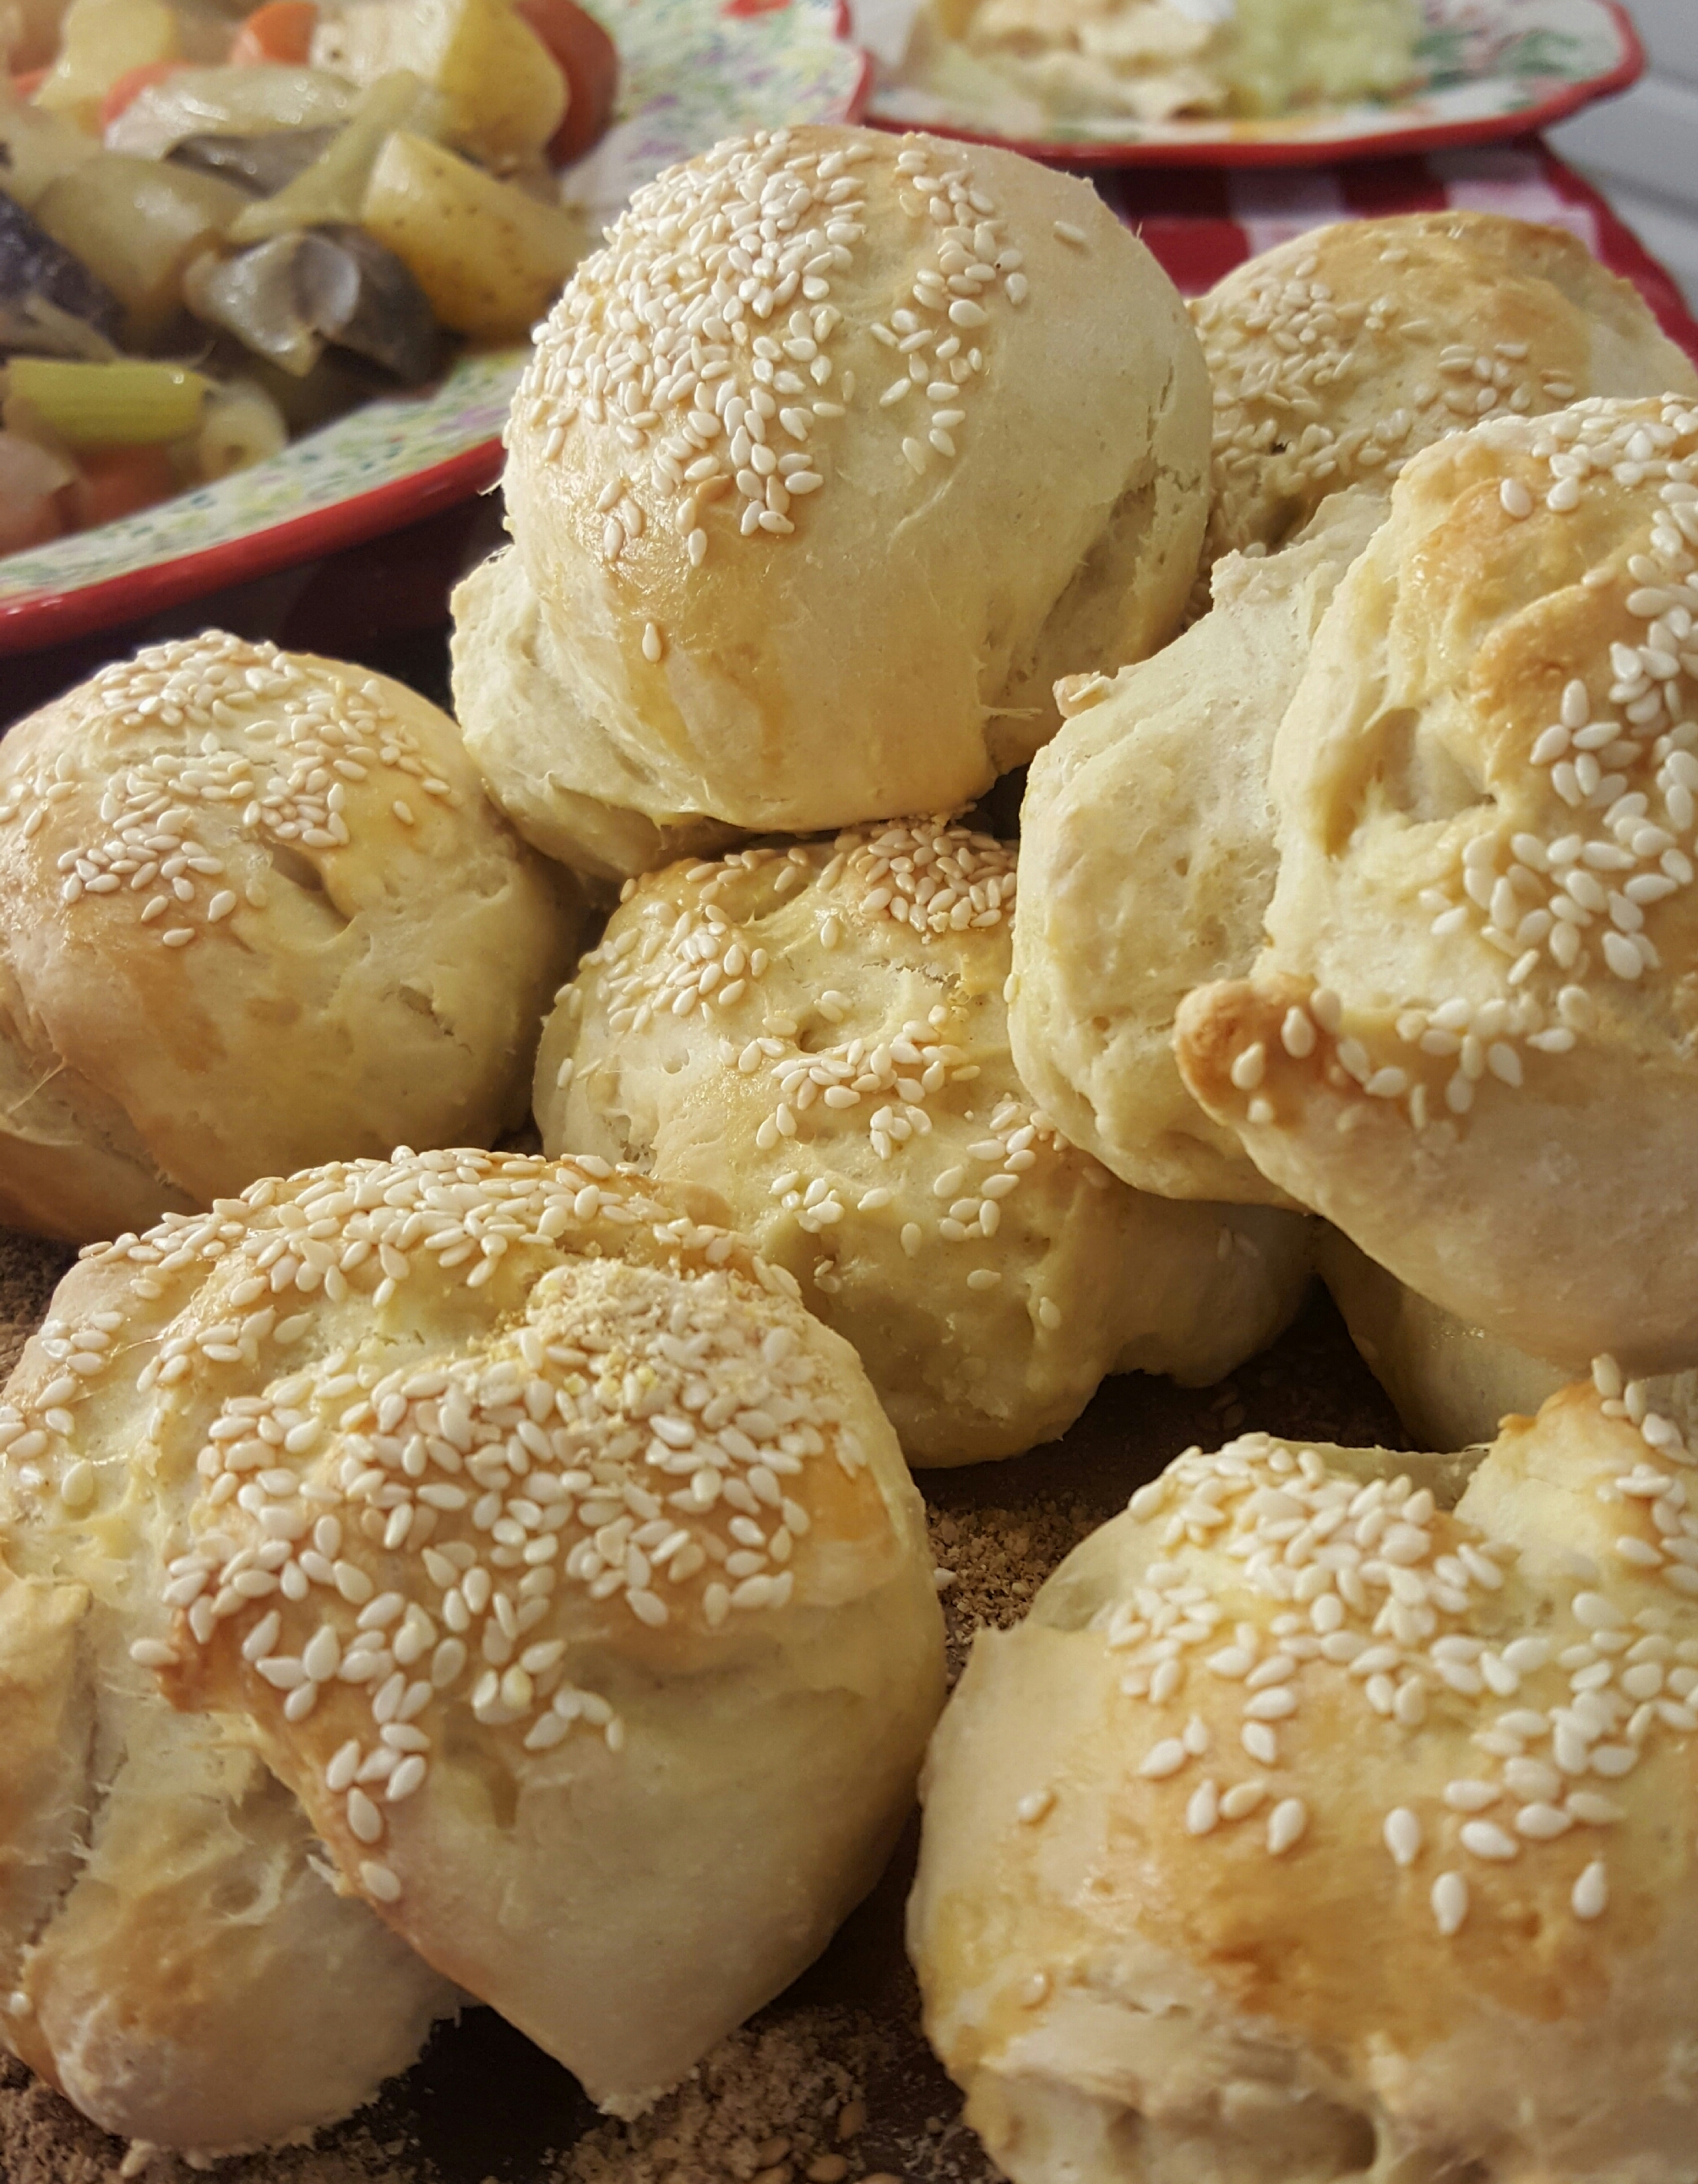 A pile of bread rolls covered in sesame seeds.